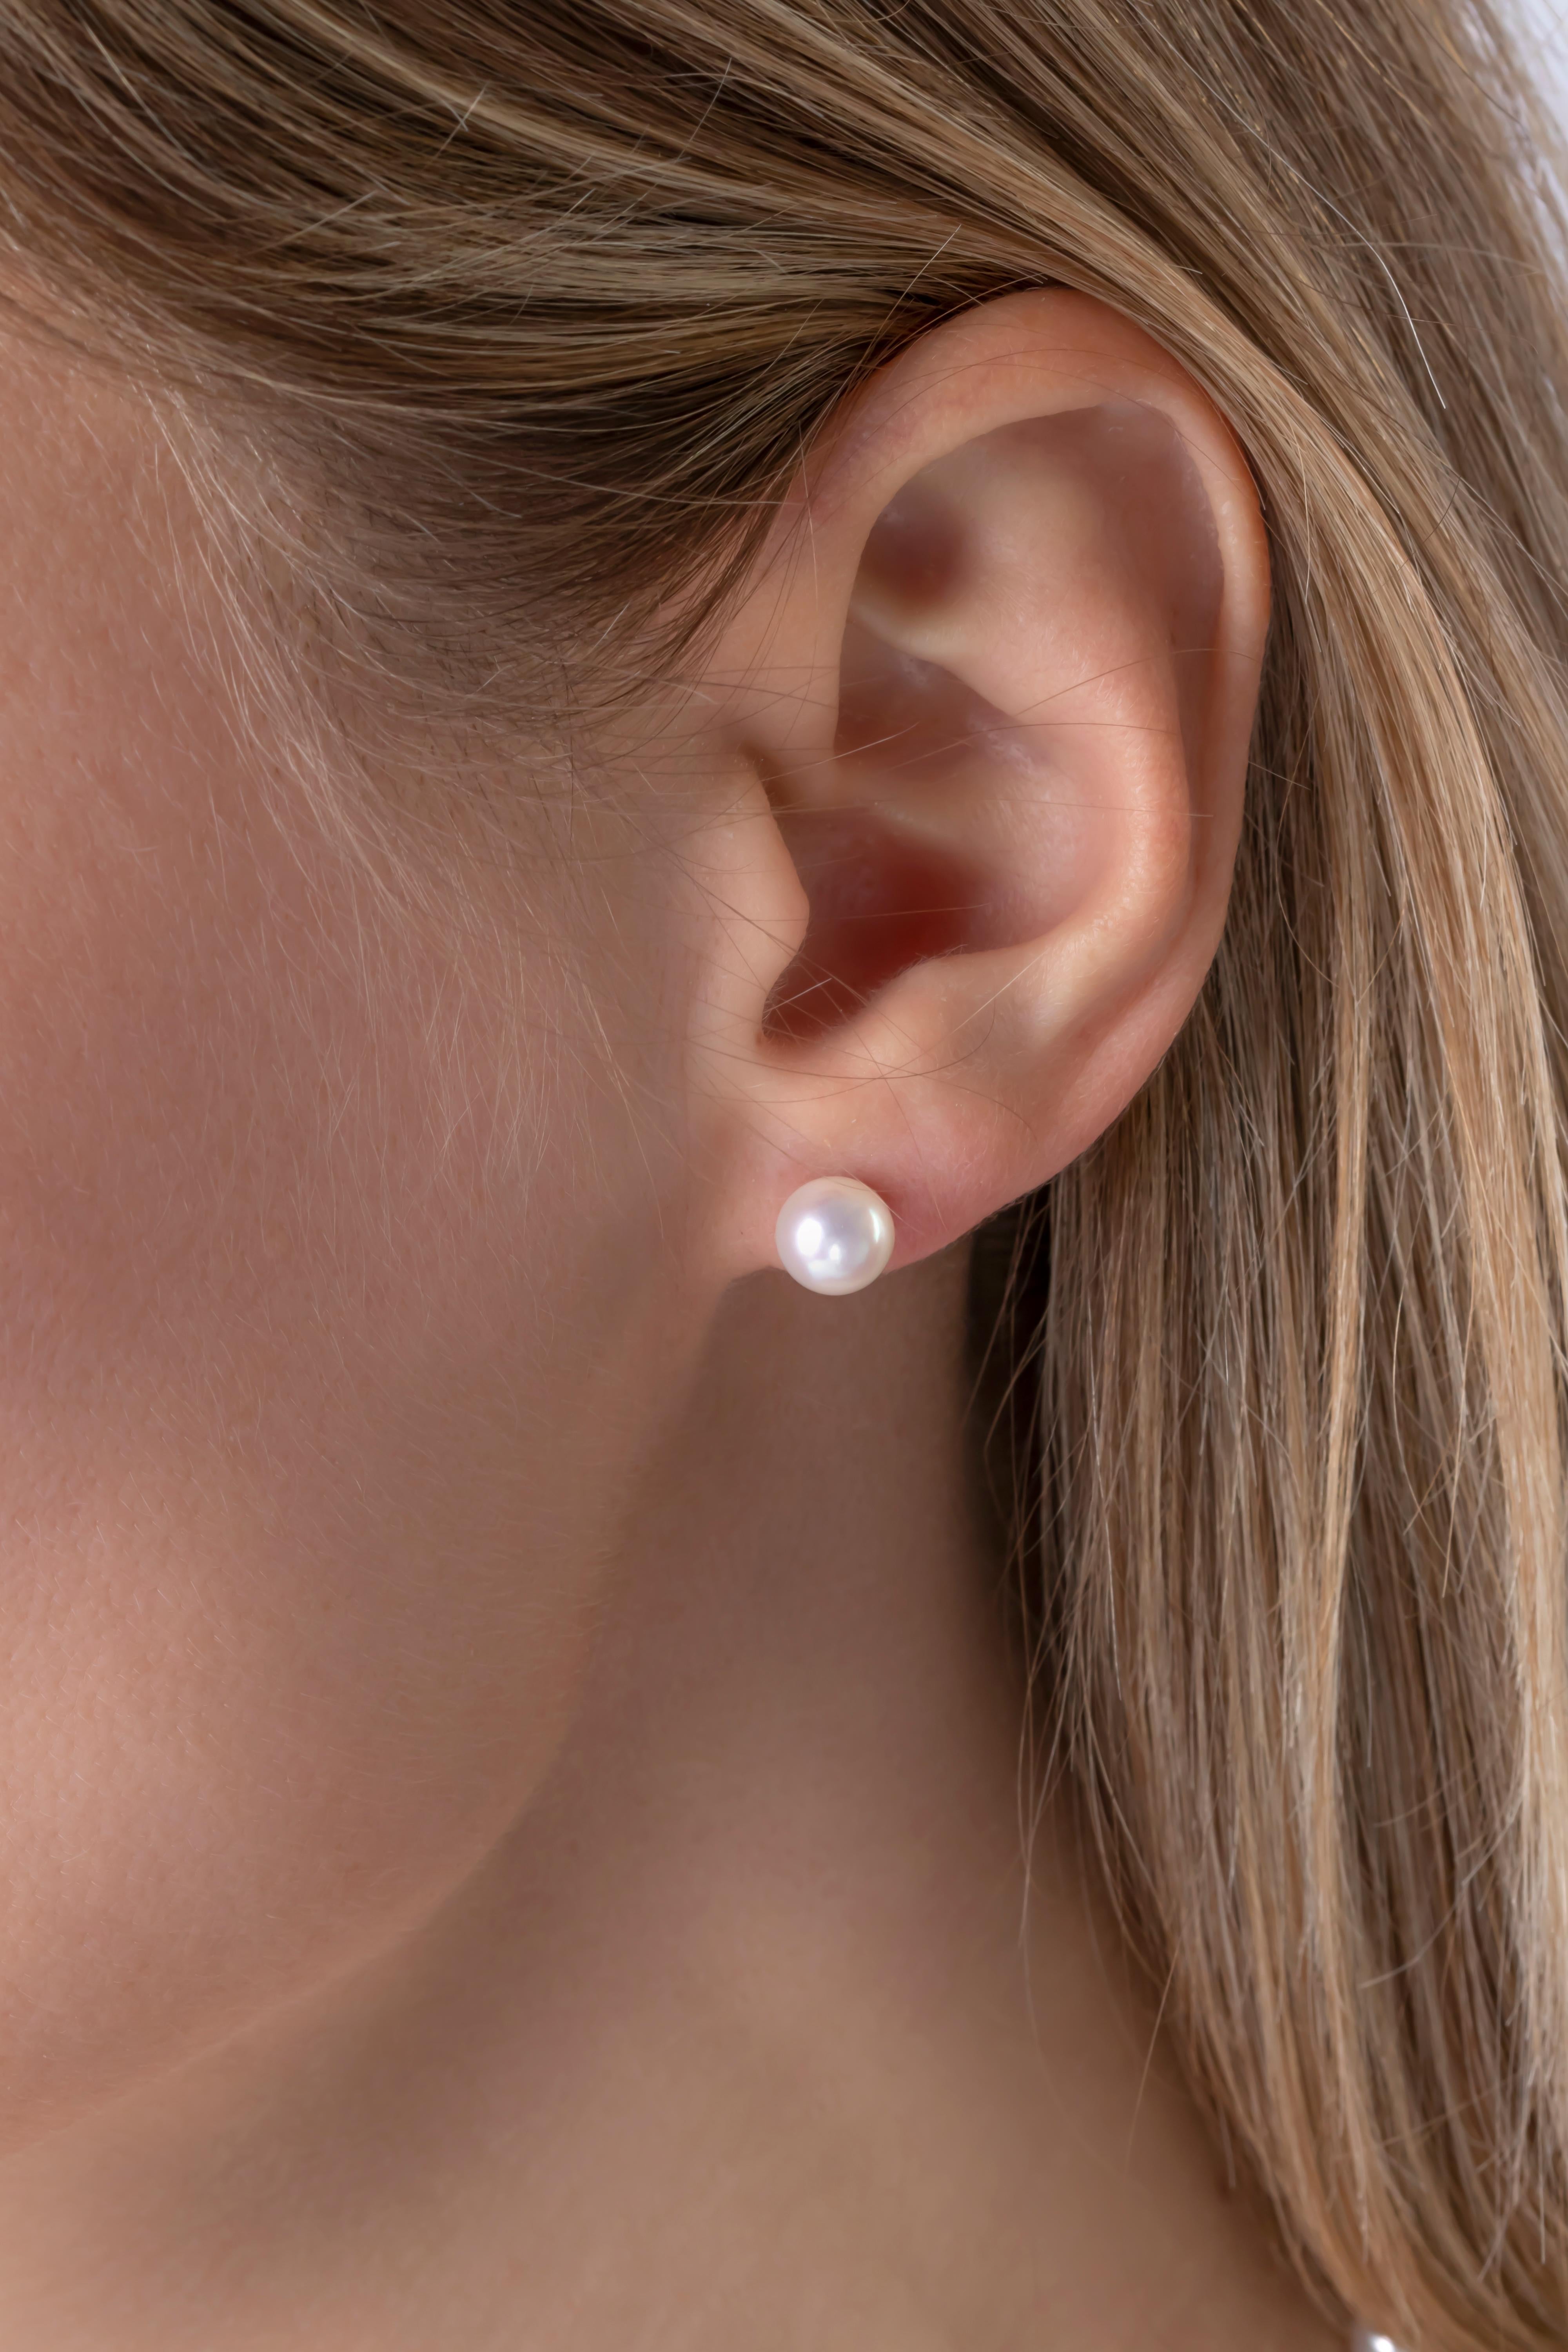 These timeless stud earrings by Yoko London feature high quality 6-6.5mm Japanese Akoya pearls on a traditional 18 Karat White Gold post and scroll fitting. Classic and elegant, these lustrous pearl earrings are an essential for every jewellery